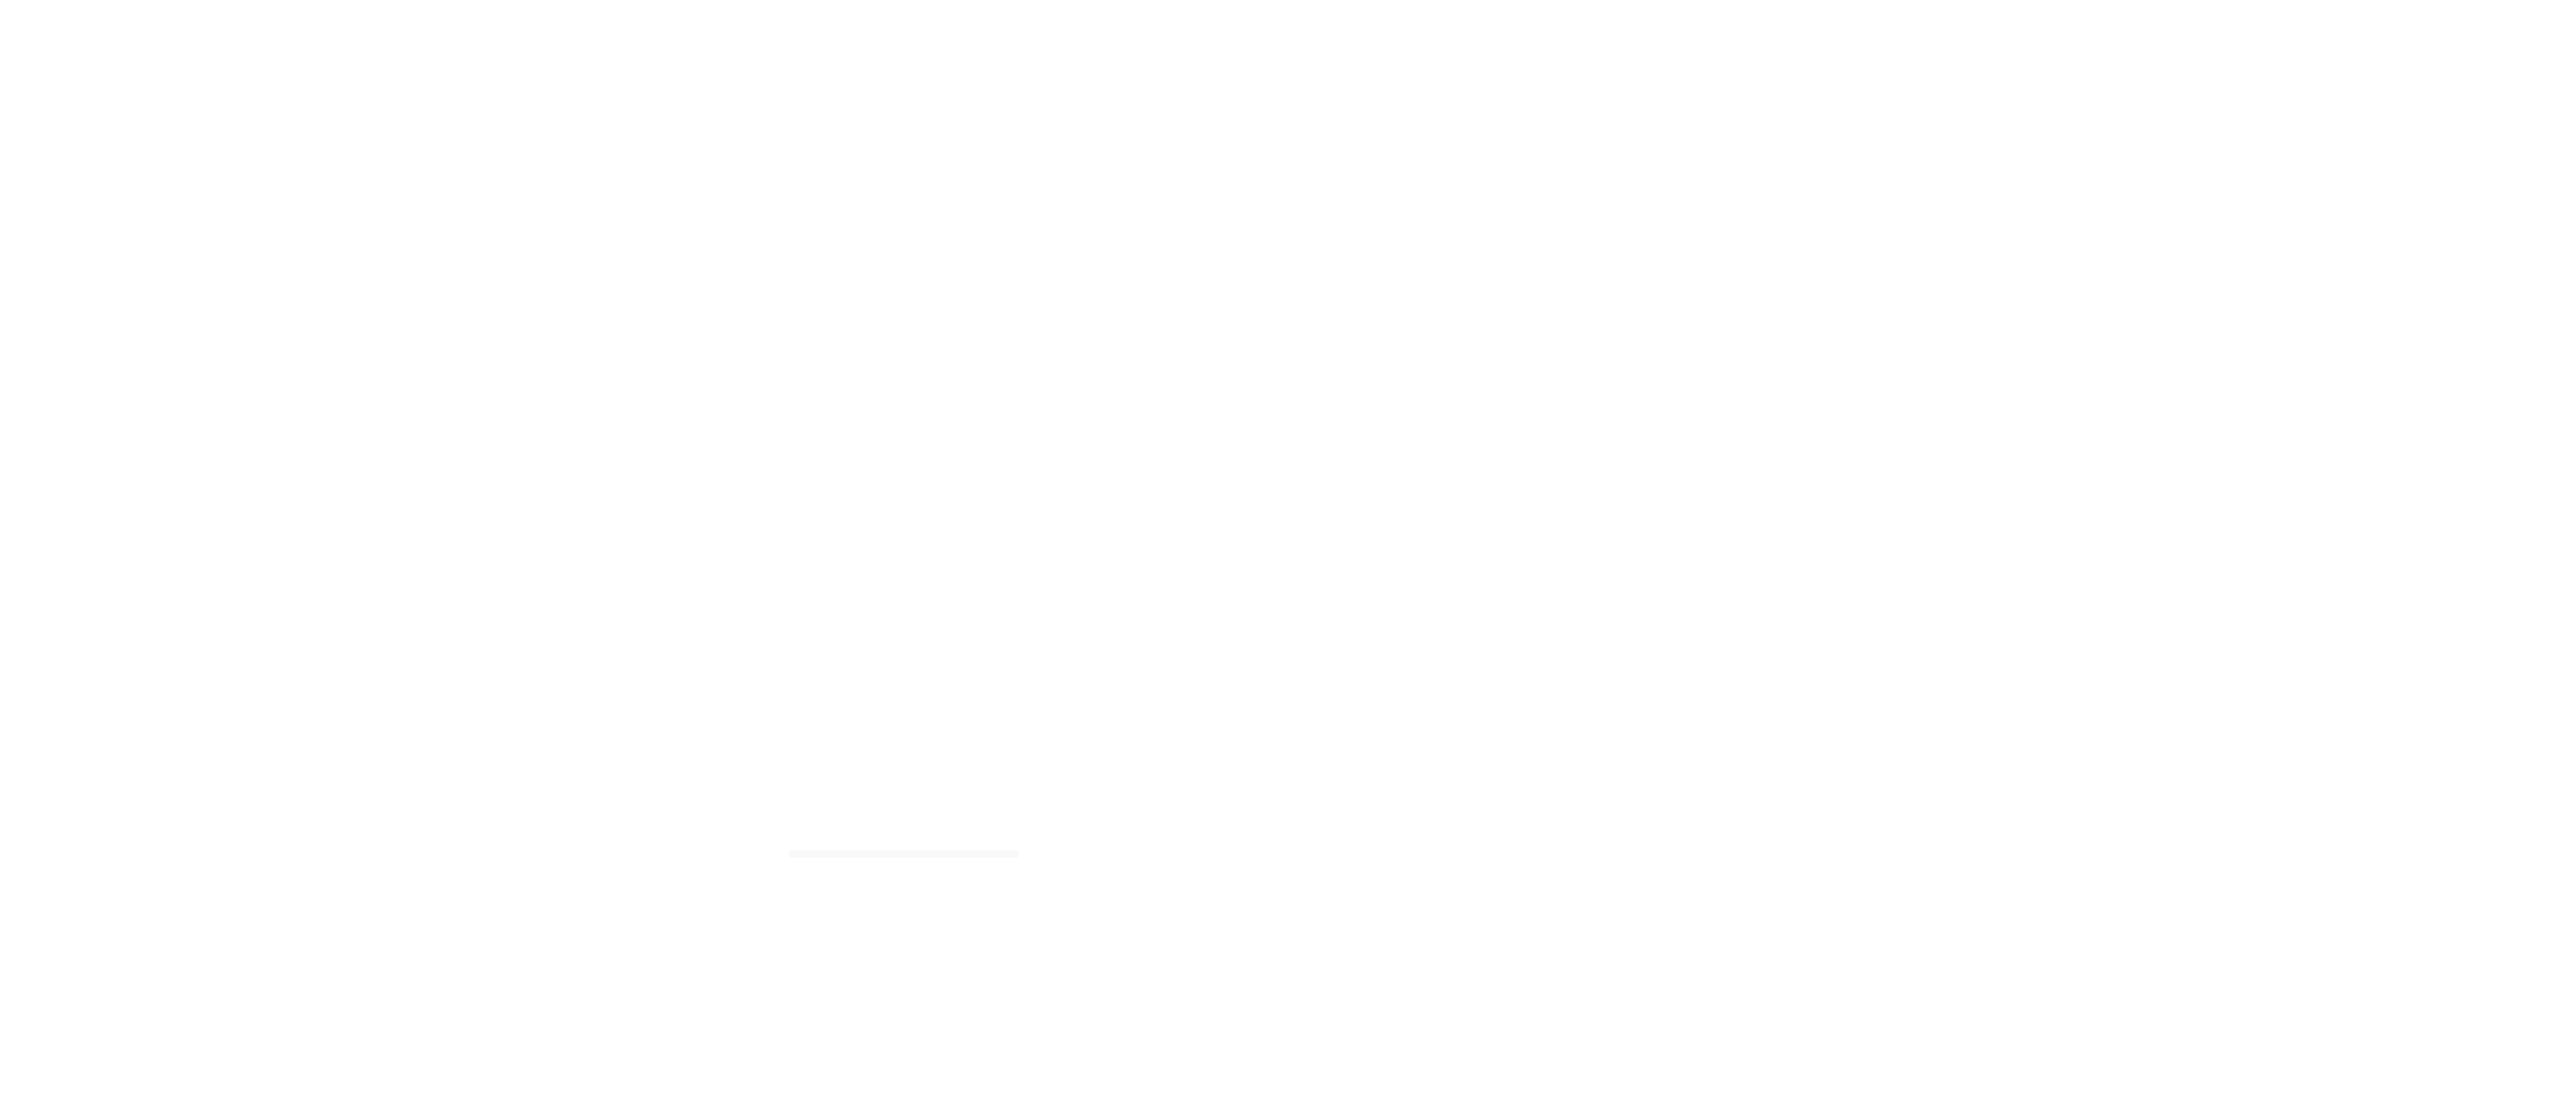 I have made 30+ icons, here are 21 of them!